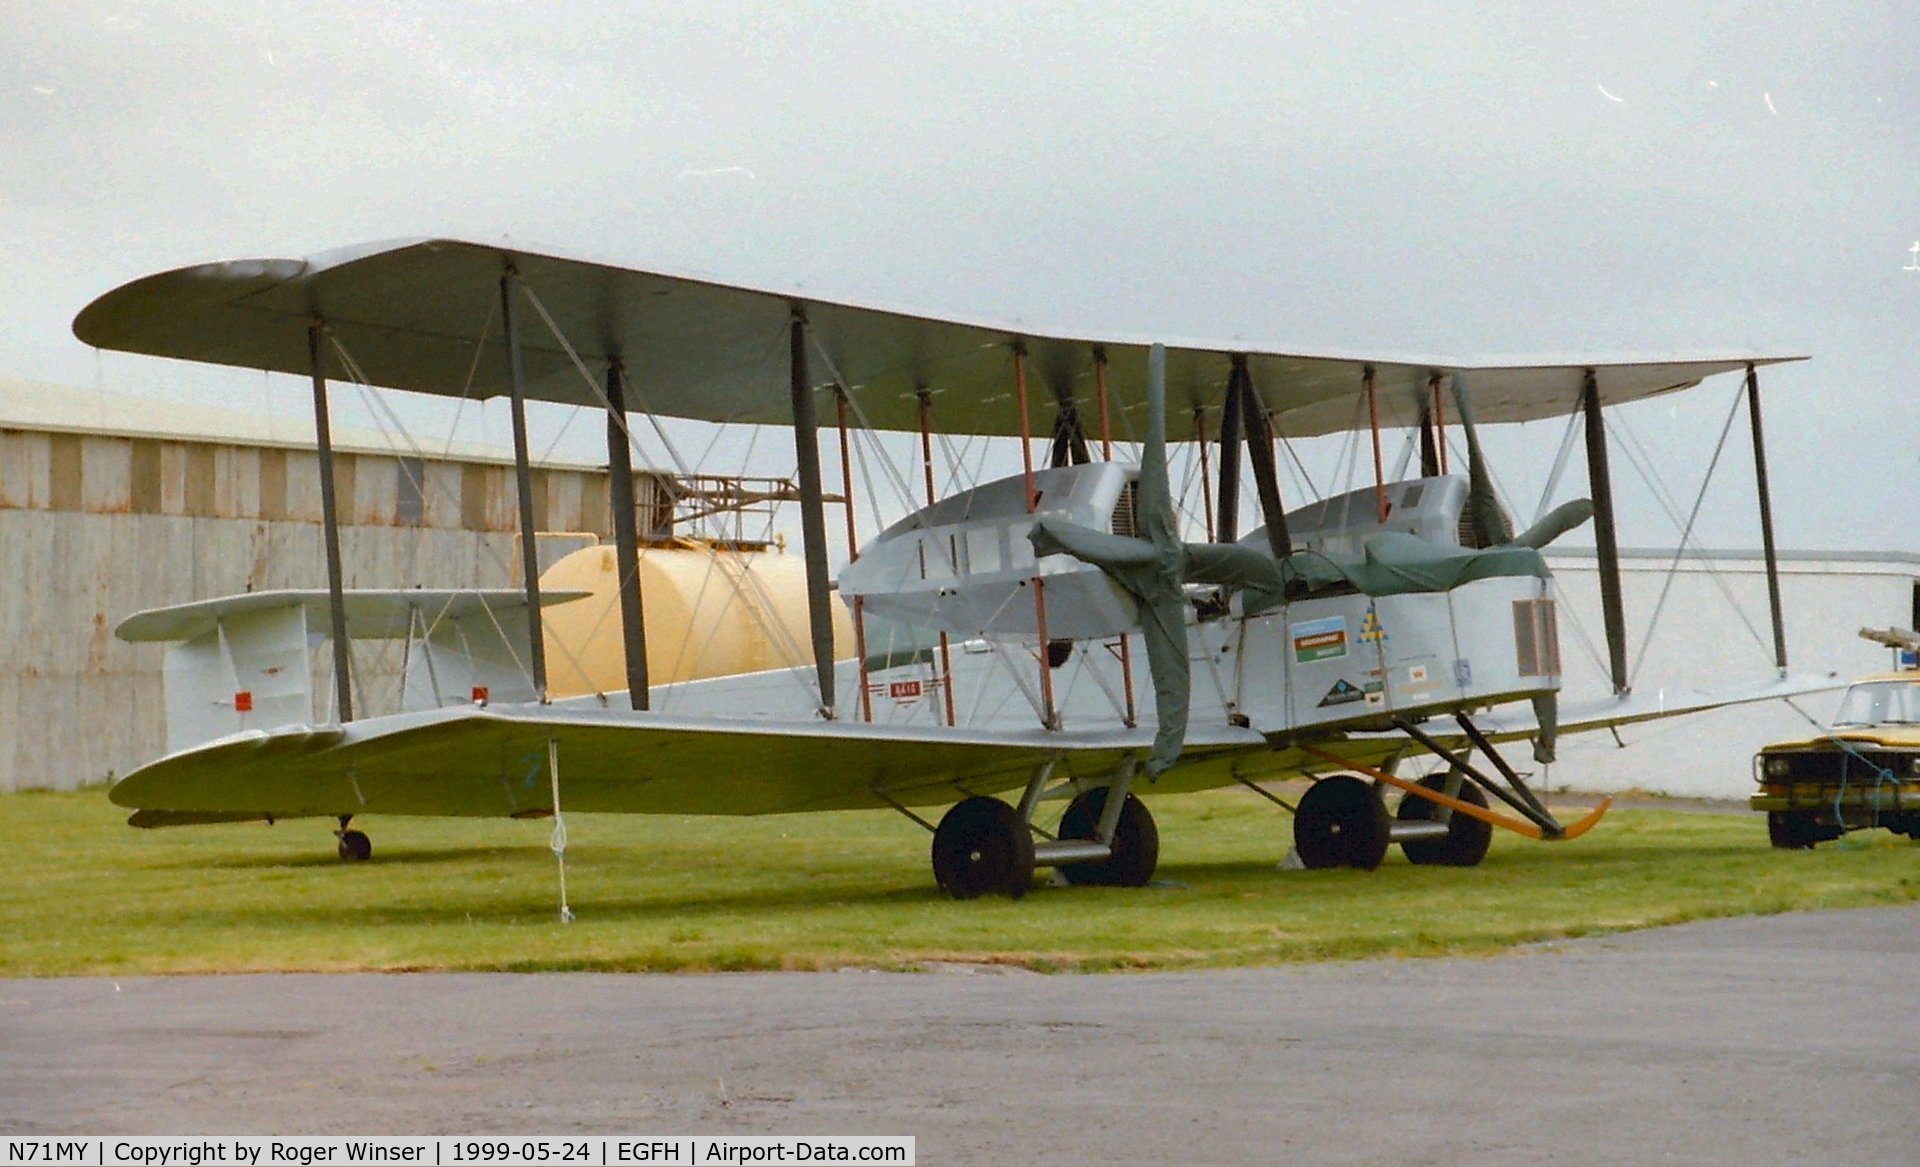 N71MY, 1994 Vickers FB-27A Vimy (replica) C/N 01, Unexpected stopover. Strong westerly winds prevented the Vimy's planned flight to Eire.